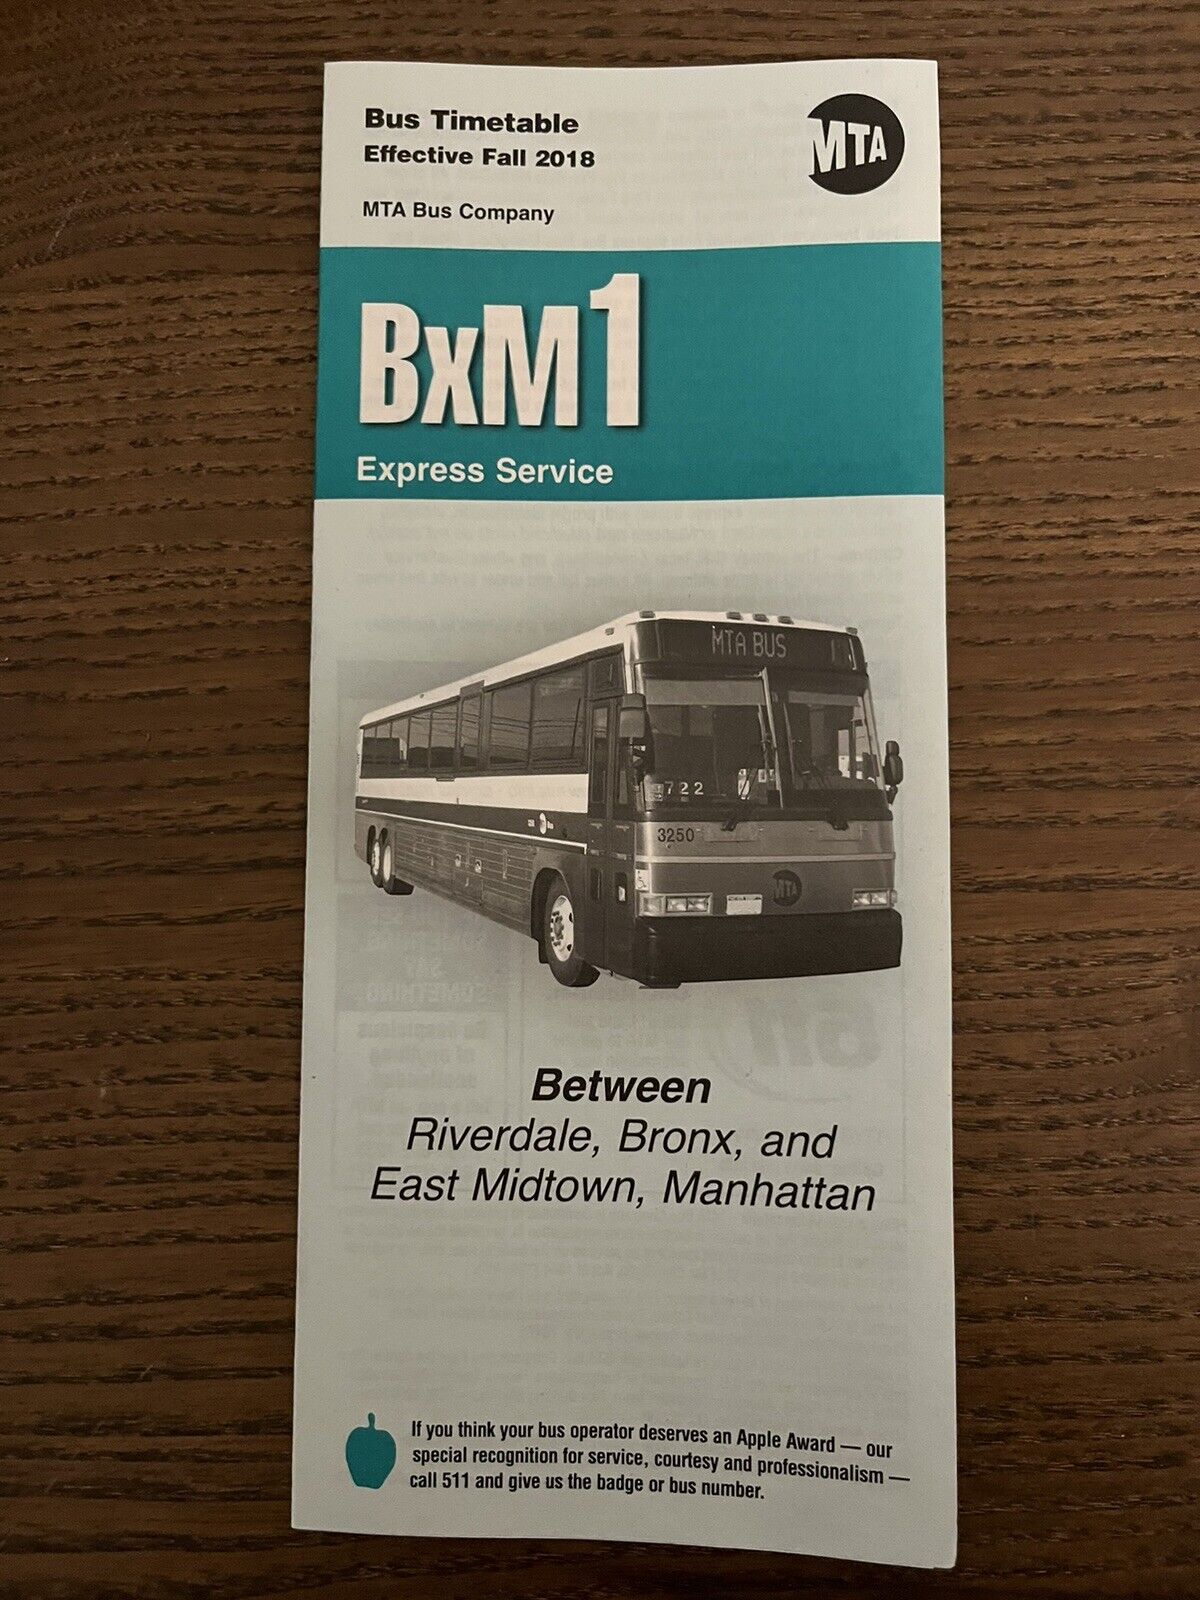 NYC MTA New York City Bronx Express Bus Timetable Schedule BxM1